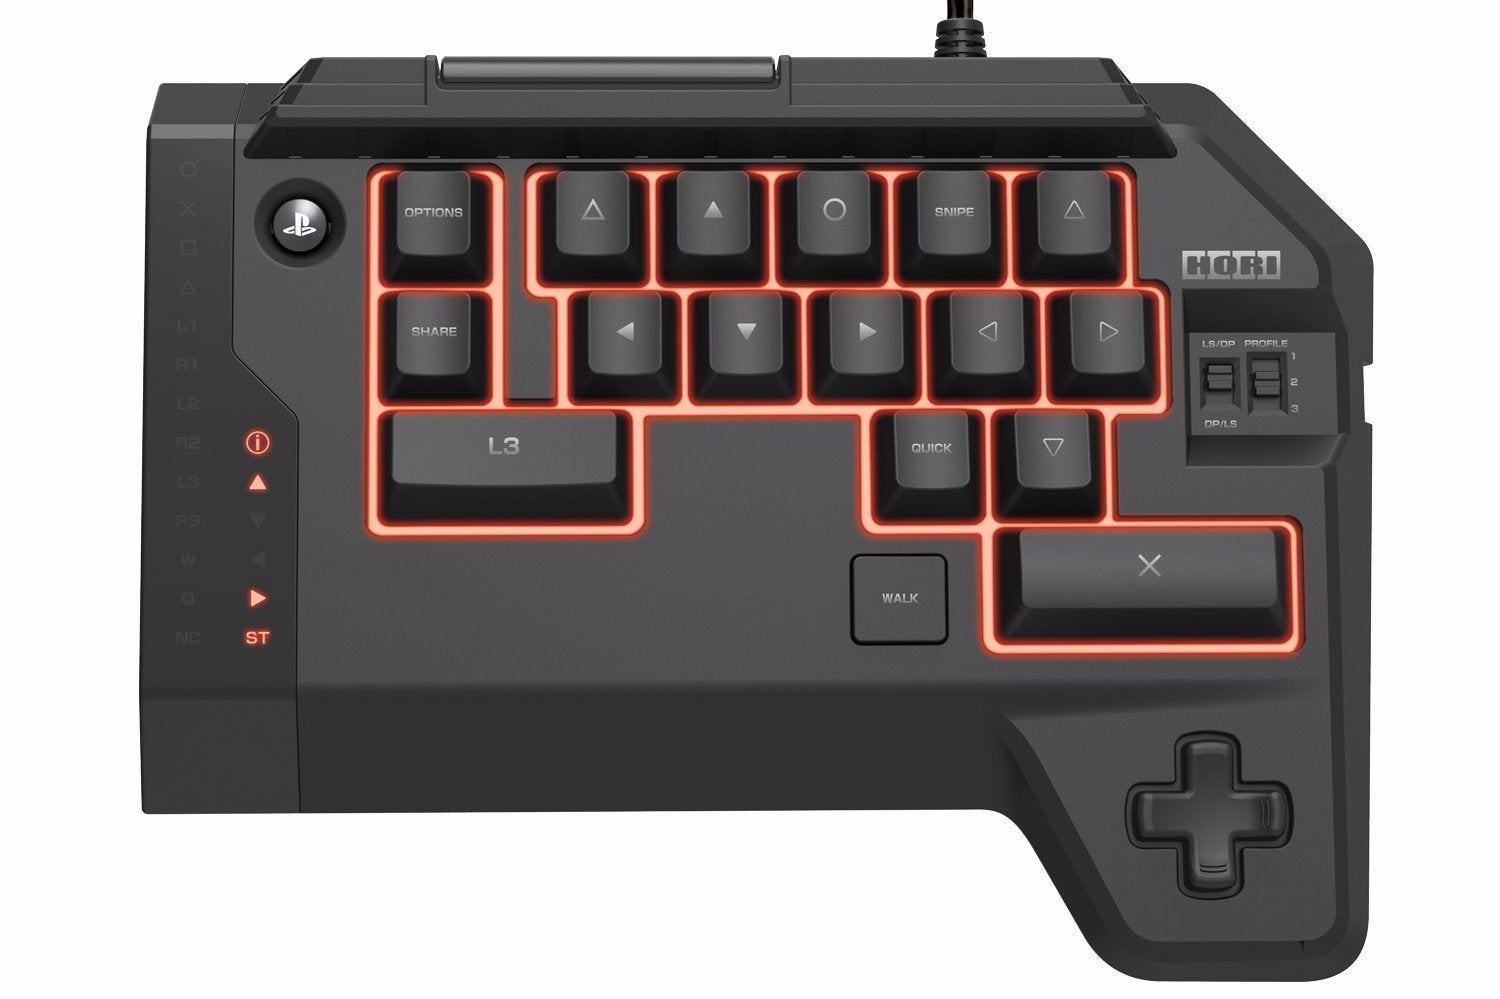 PS4 keyboard / mouse controller replicates PC FPS-style gaming |